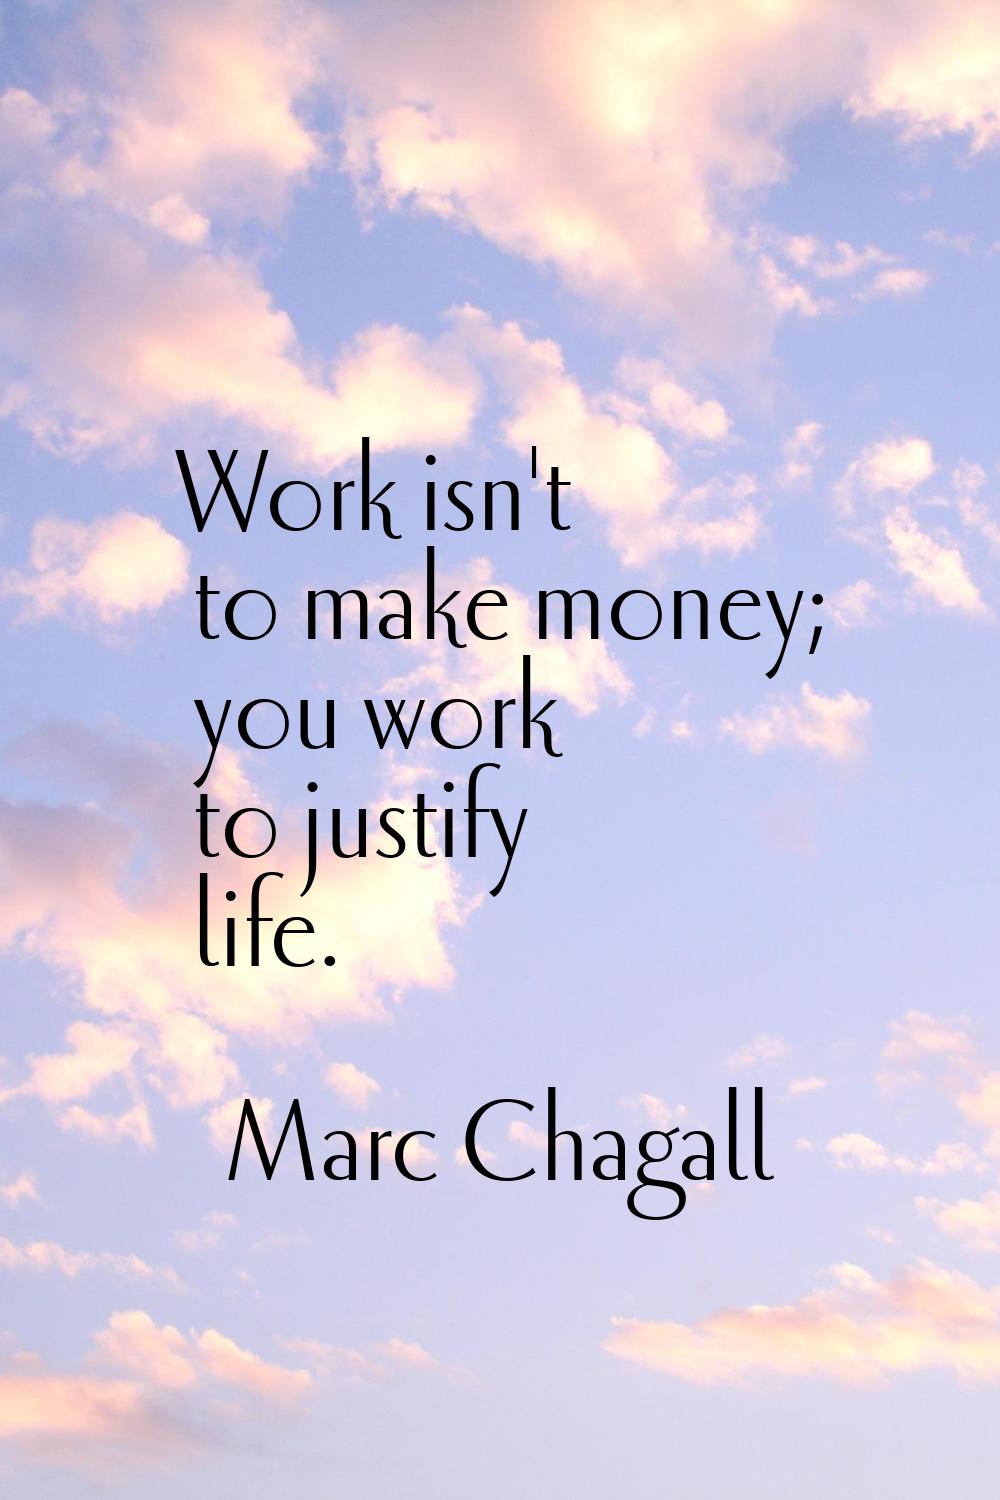 Work isn't to make money; you work to justify life.